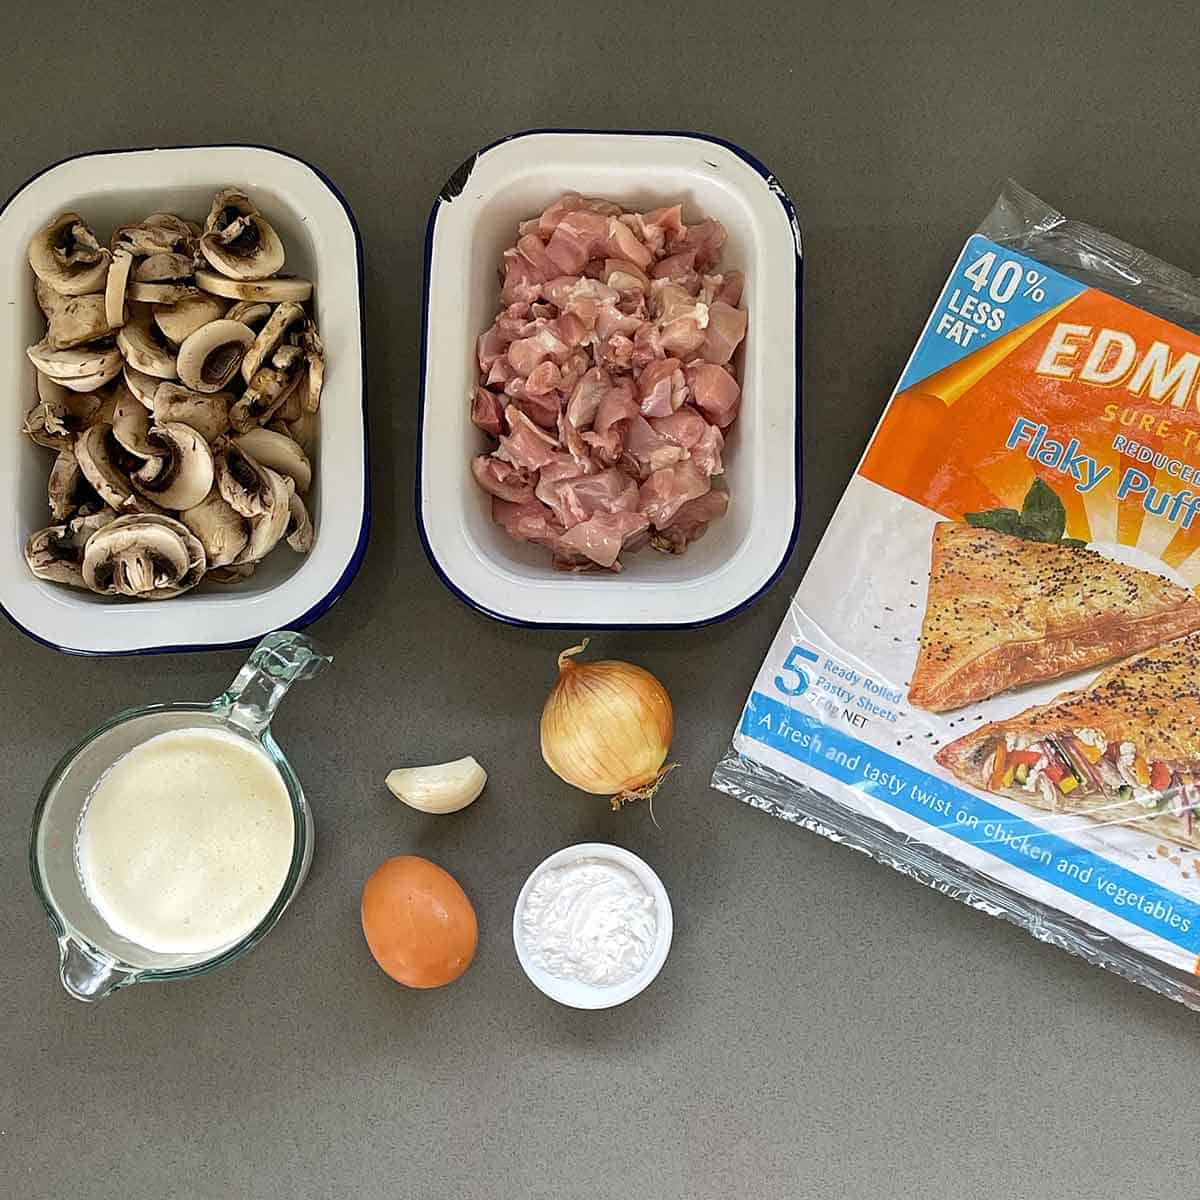 The ingredients for chicken and mushroom pie on a grey bench